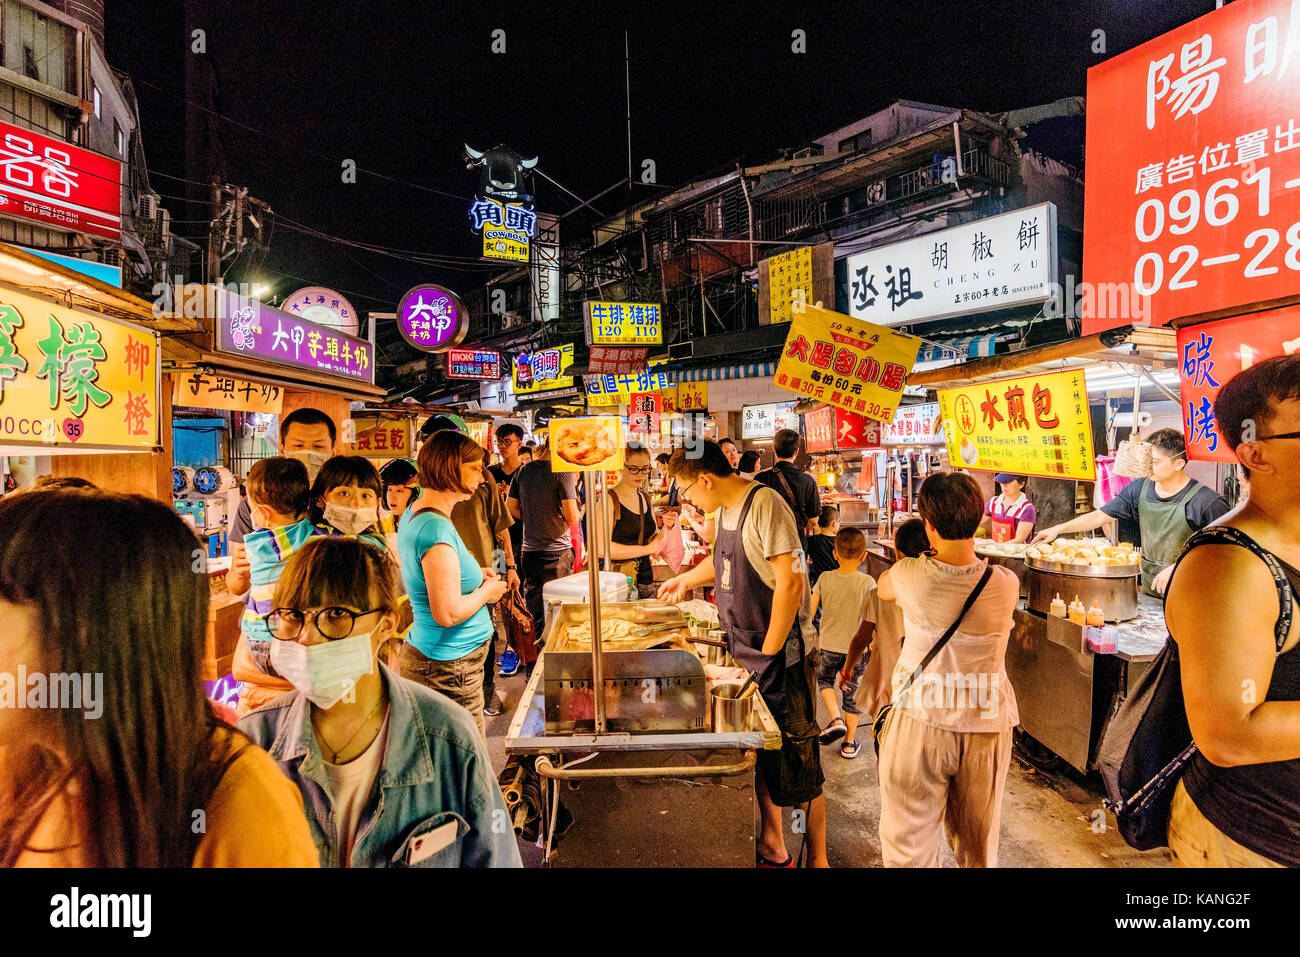 TAIPEI, TAIWAN - JULY 11: This is Shilin night market a famous night market where many people come to try Taiwanese food and go shopping on July 11, 2 Stock Photo